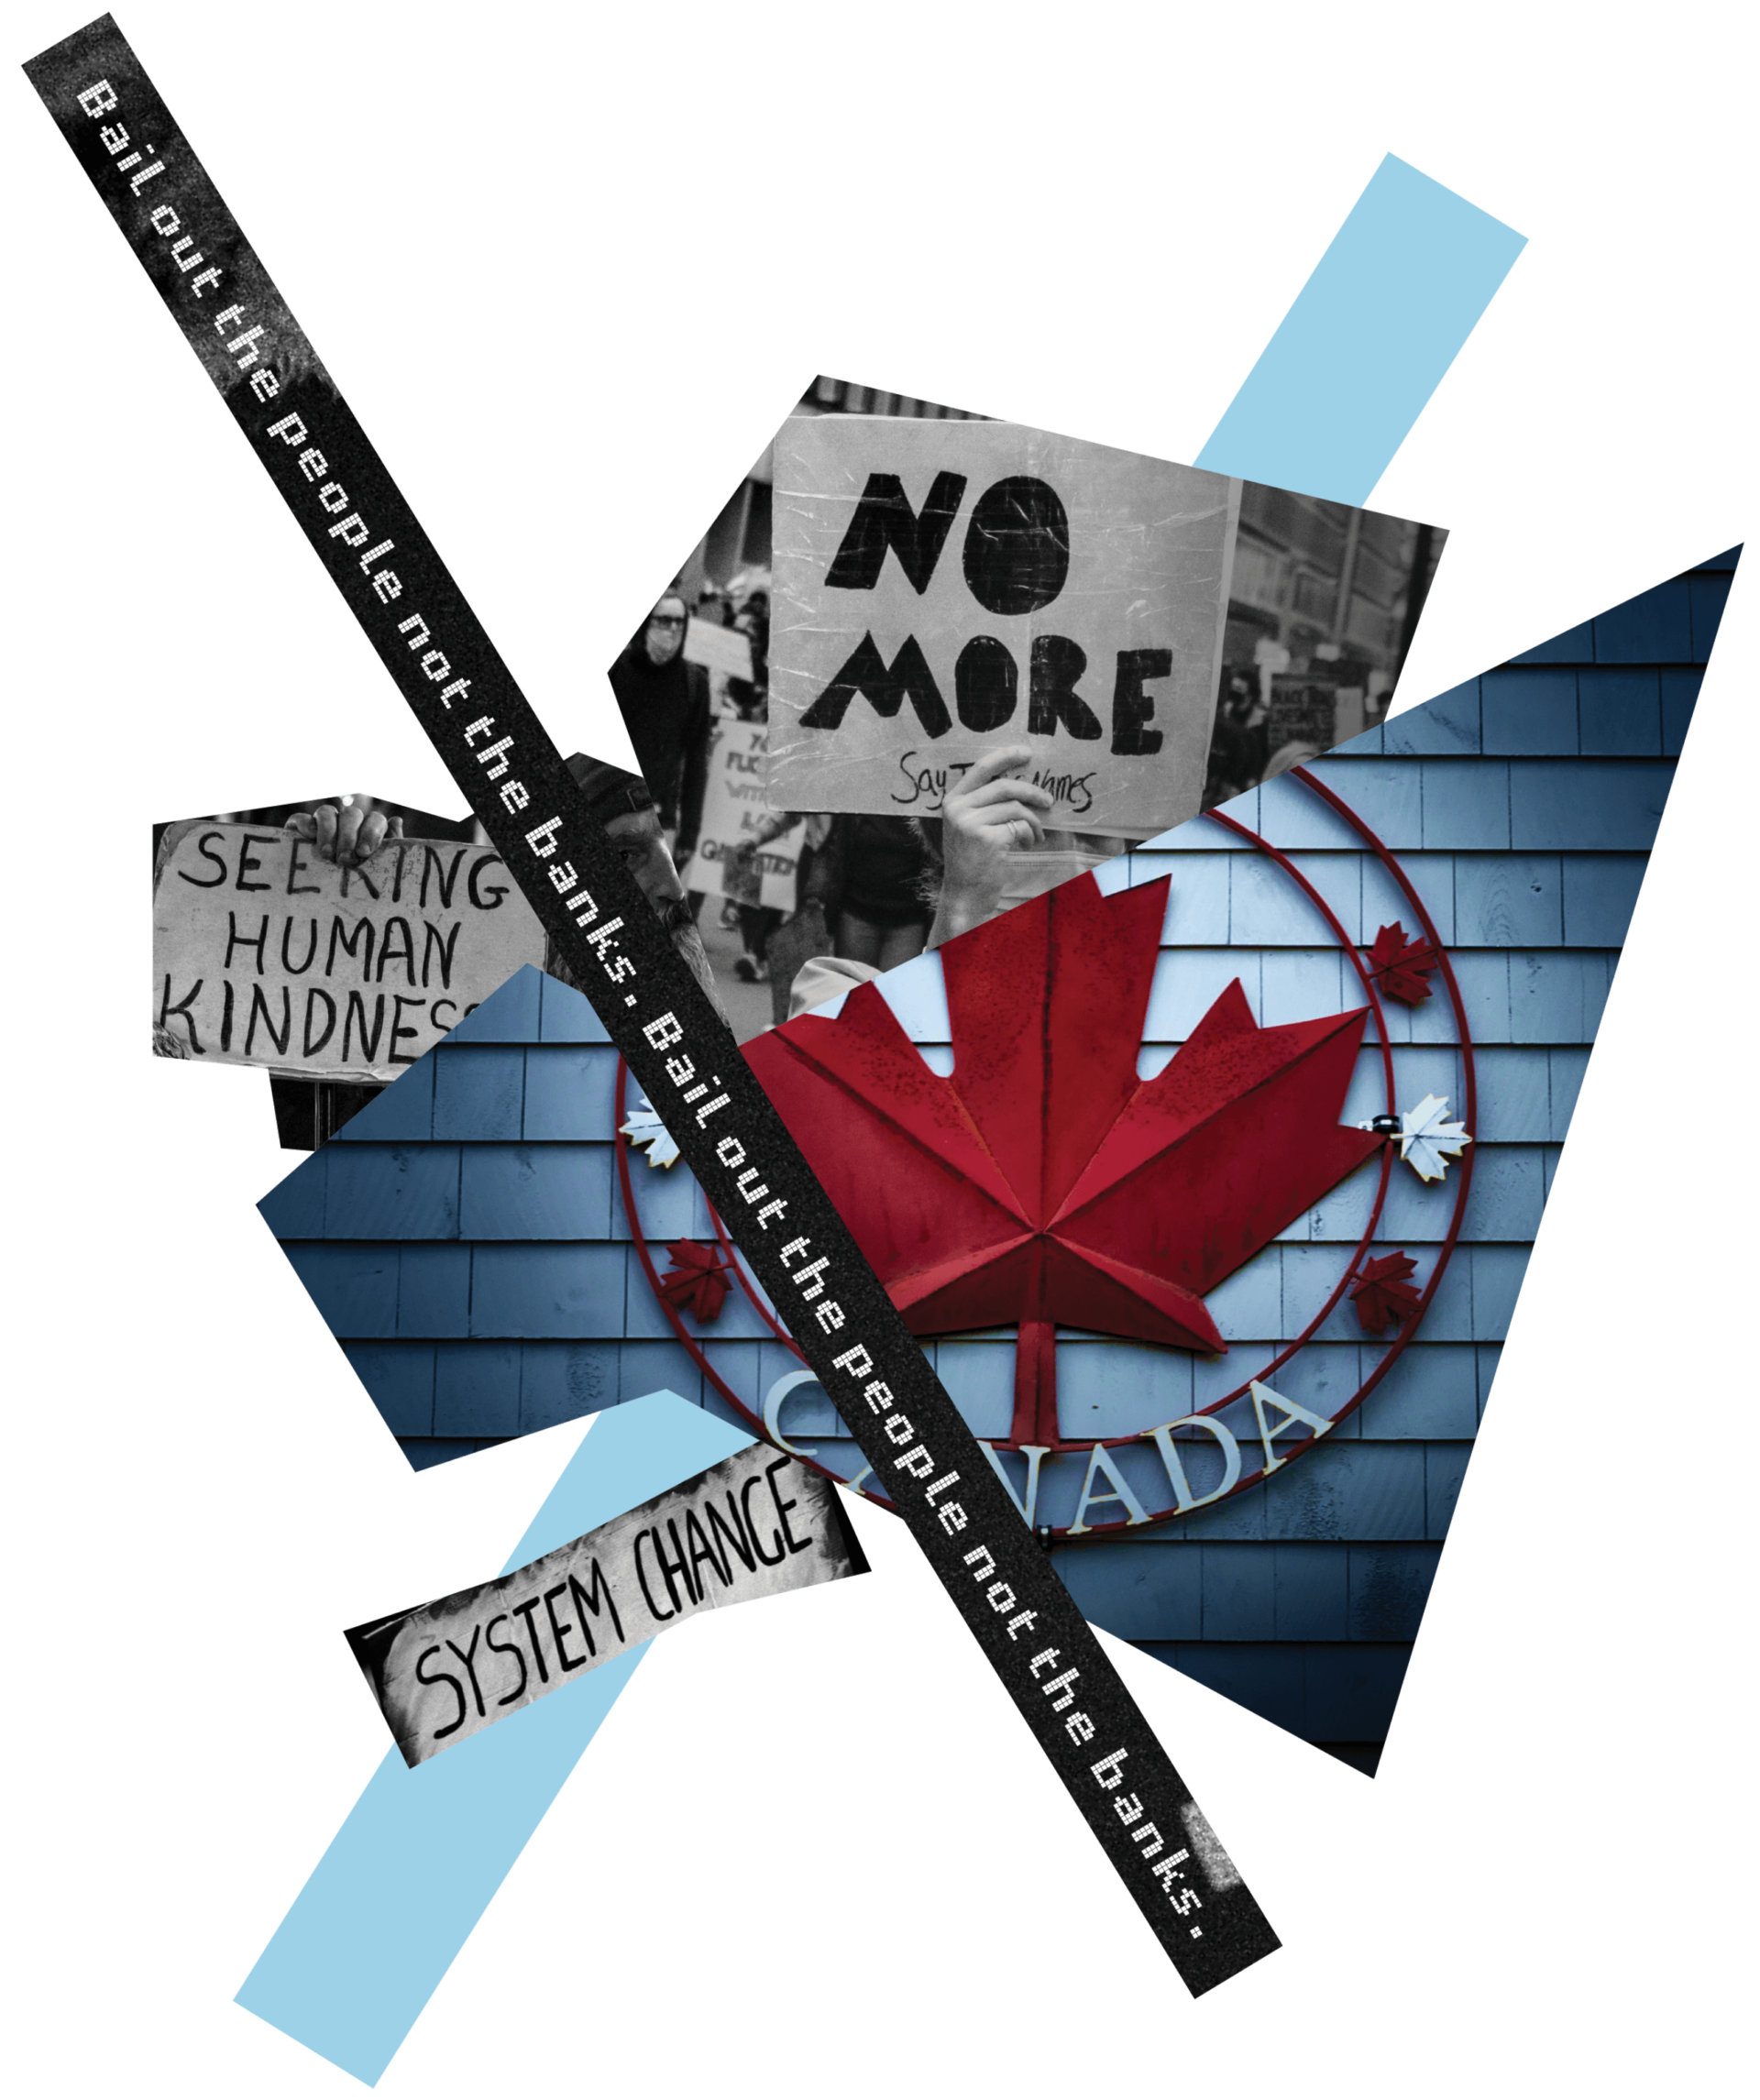 Collage image of protest images and the canadian flag